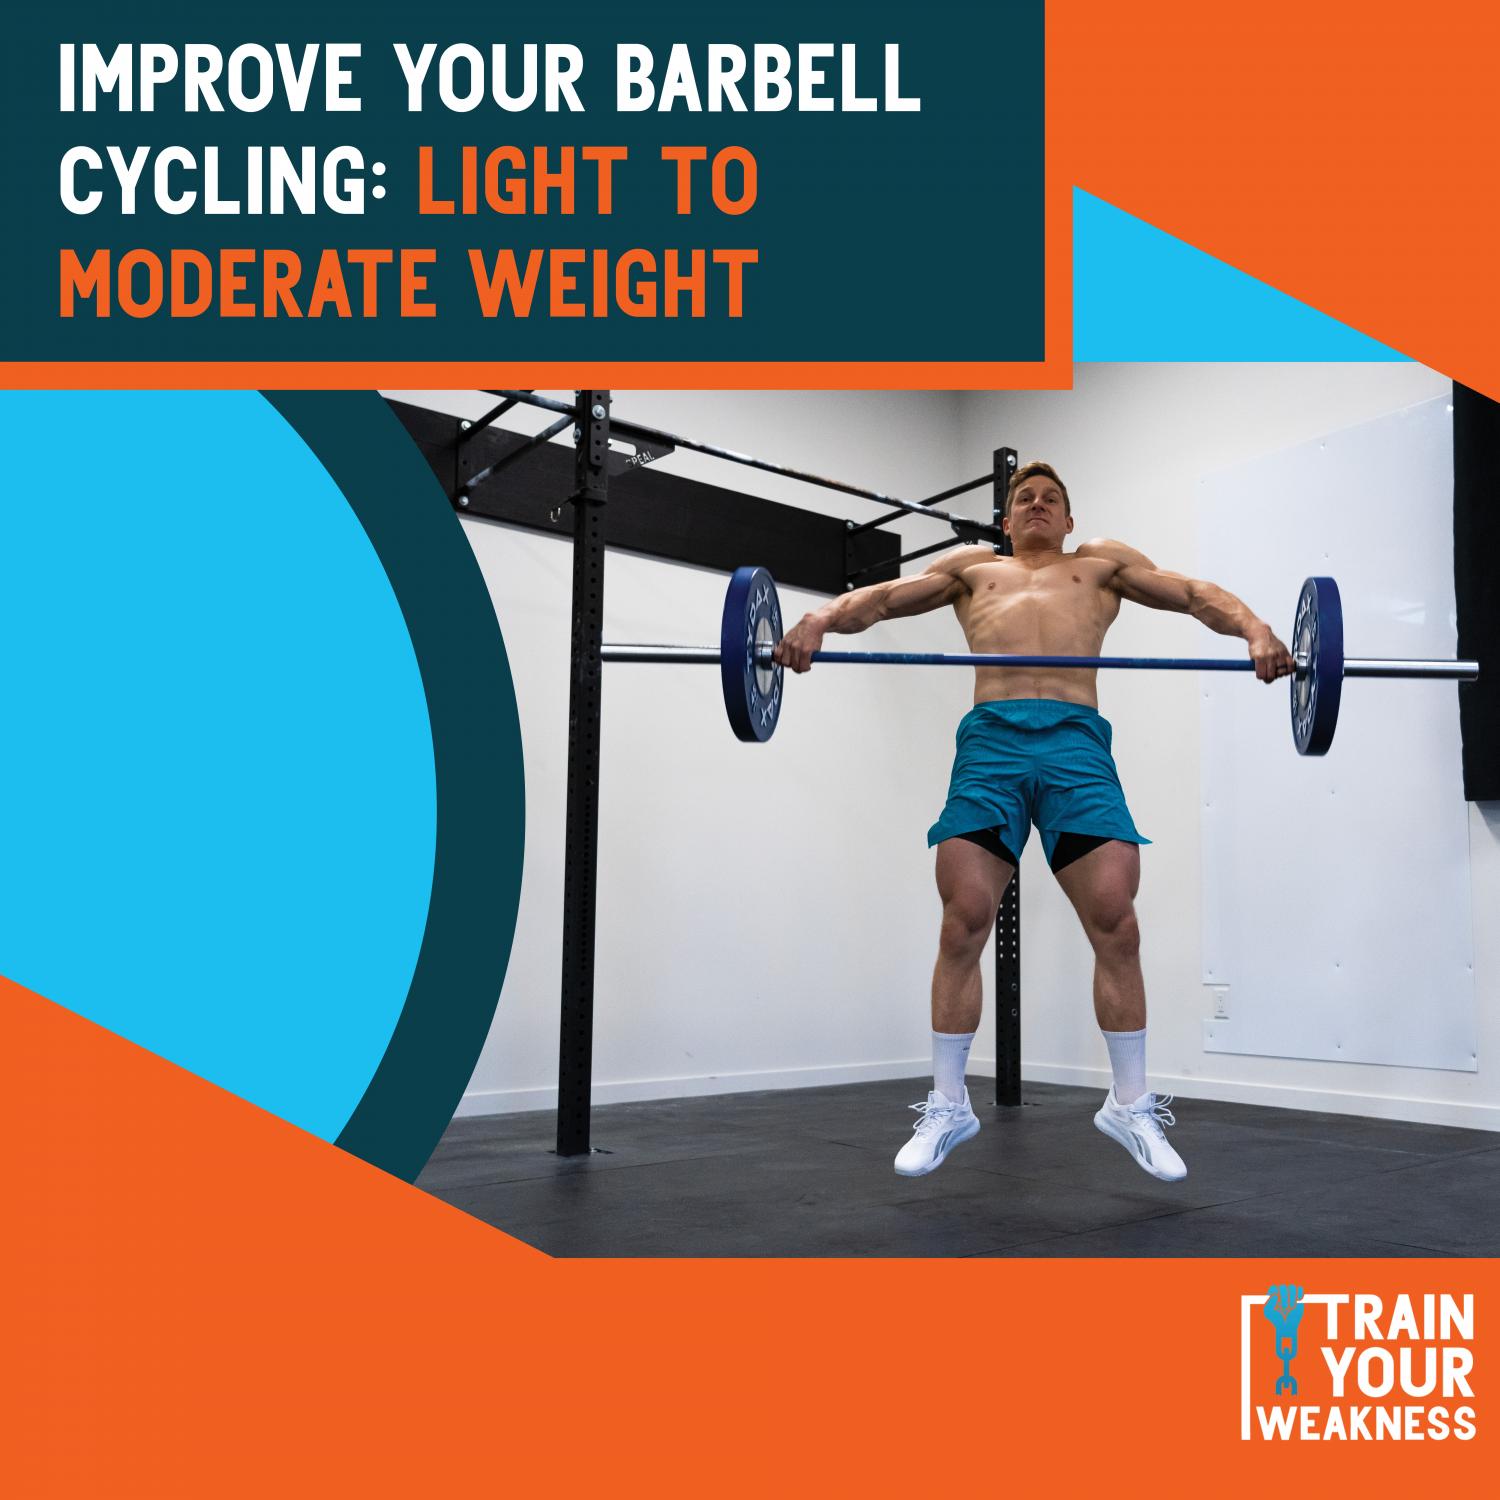 Improve Your Barbell Cycling: Light to Moderate Weight